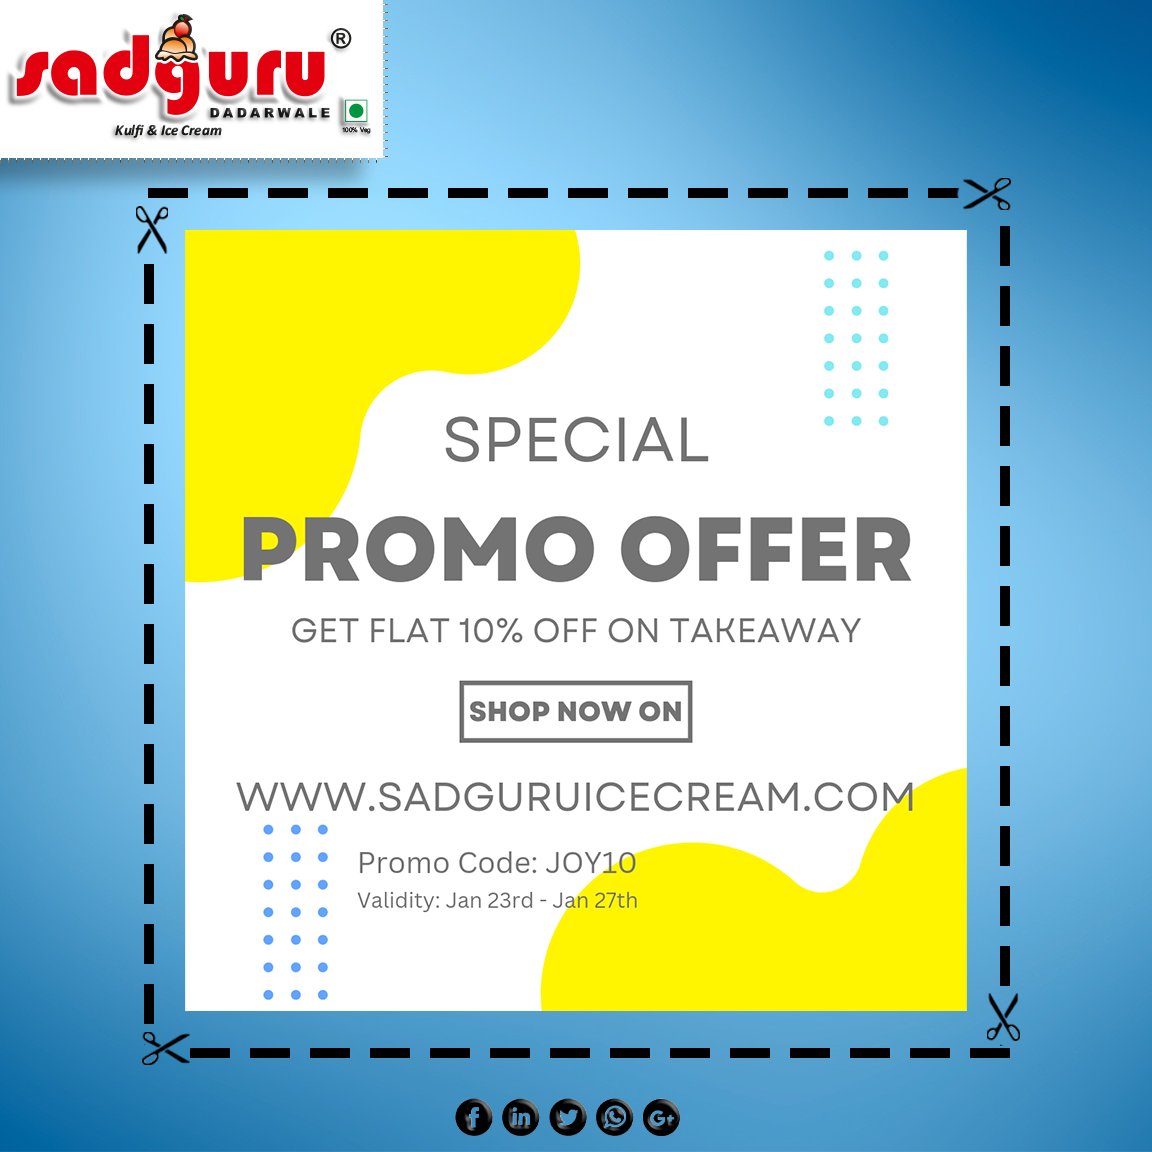 Make your day even more better with your Loved Ones with our SPECIAL PROMO OFFER.
Share it in your group with you friends. sadguruicecream.com
#happiness #offer #sadgurukulfi #sadguruicecream #icecream #kulfi #frozendessert #mumbaifoodie #mumbaiicecream #mumbaikulfi #mumbai